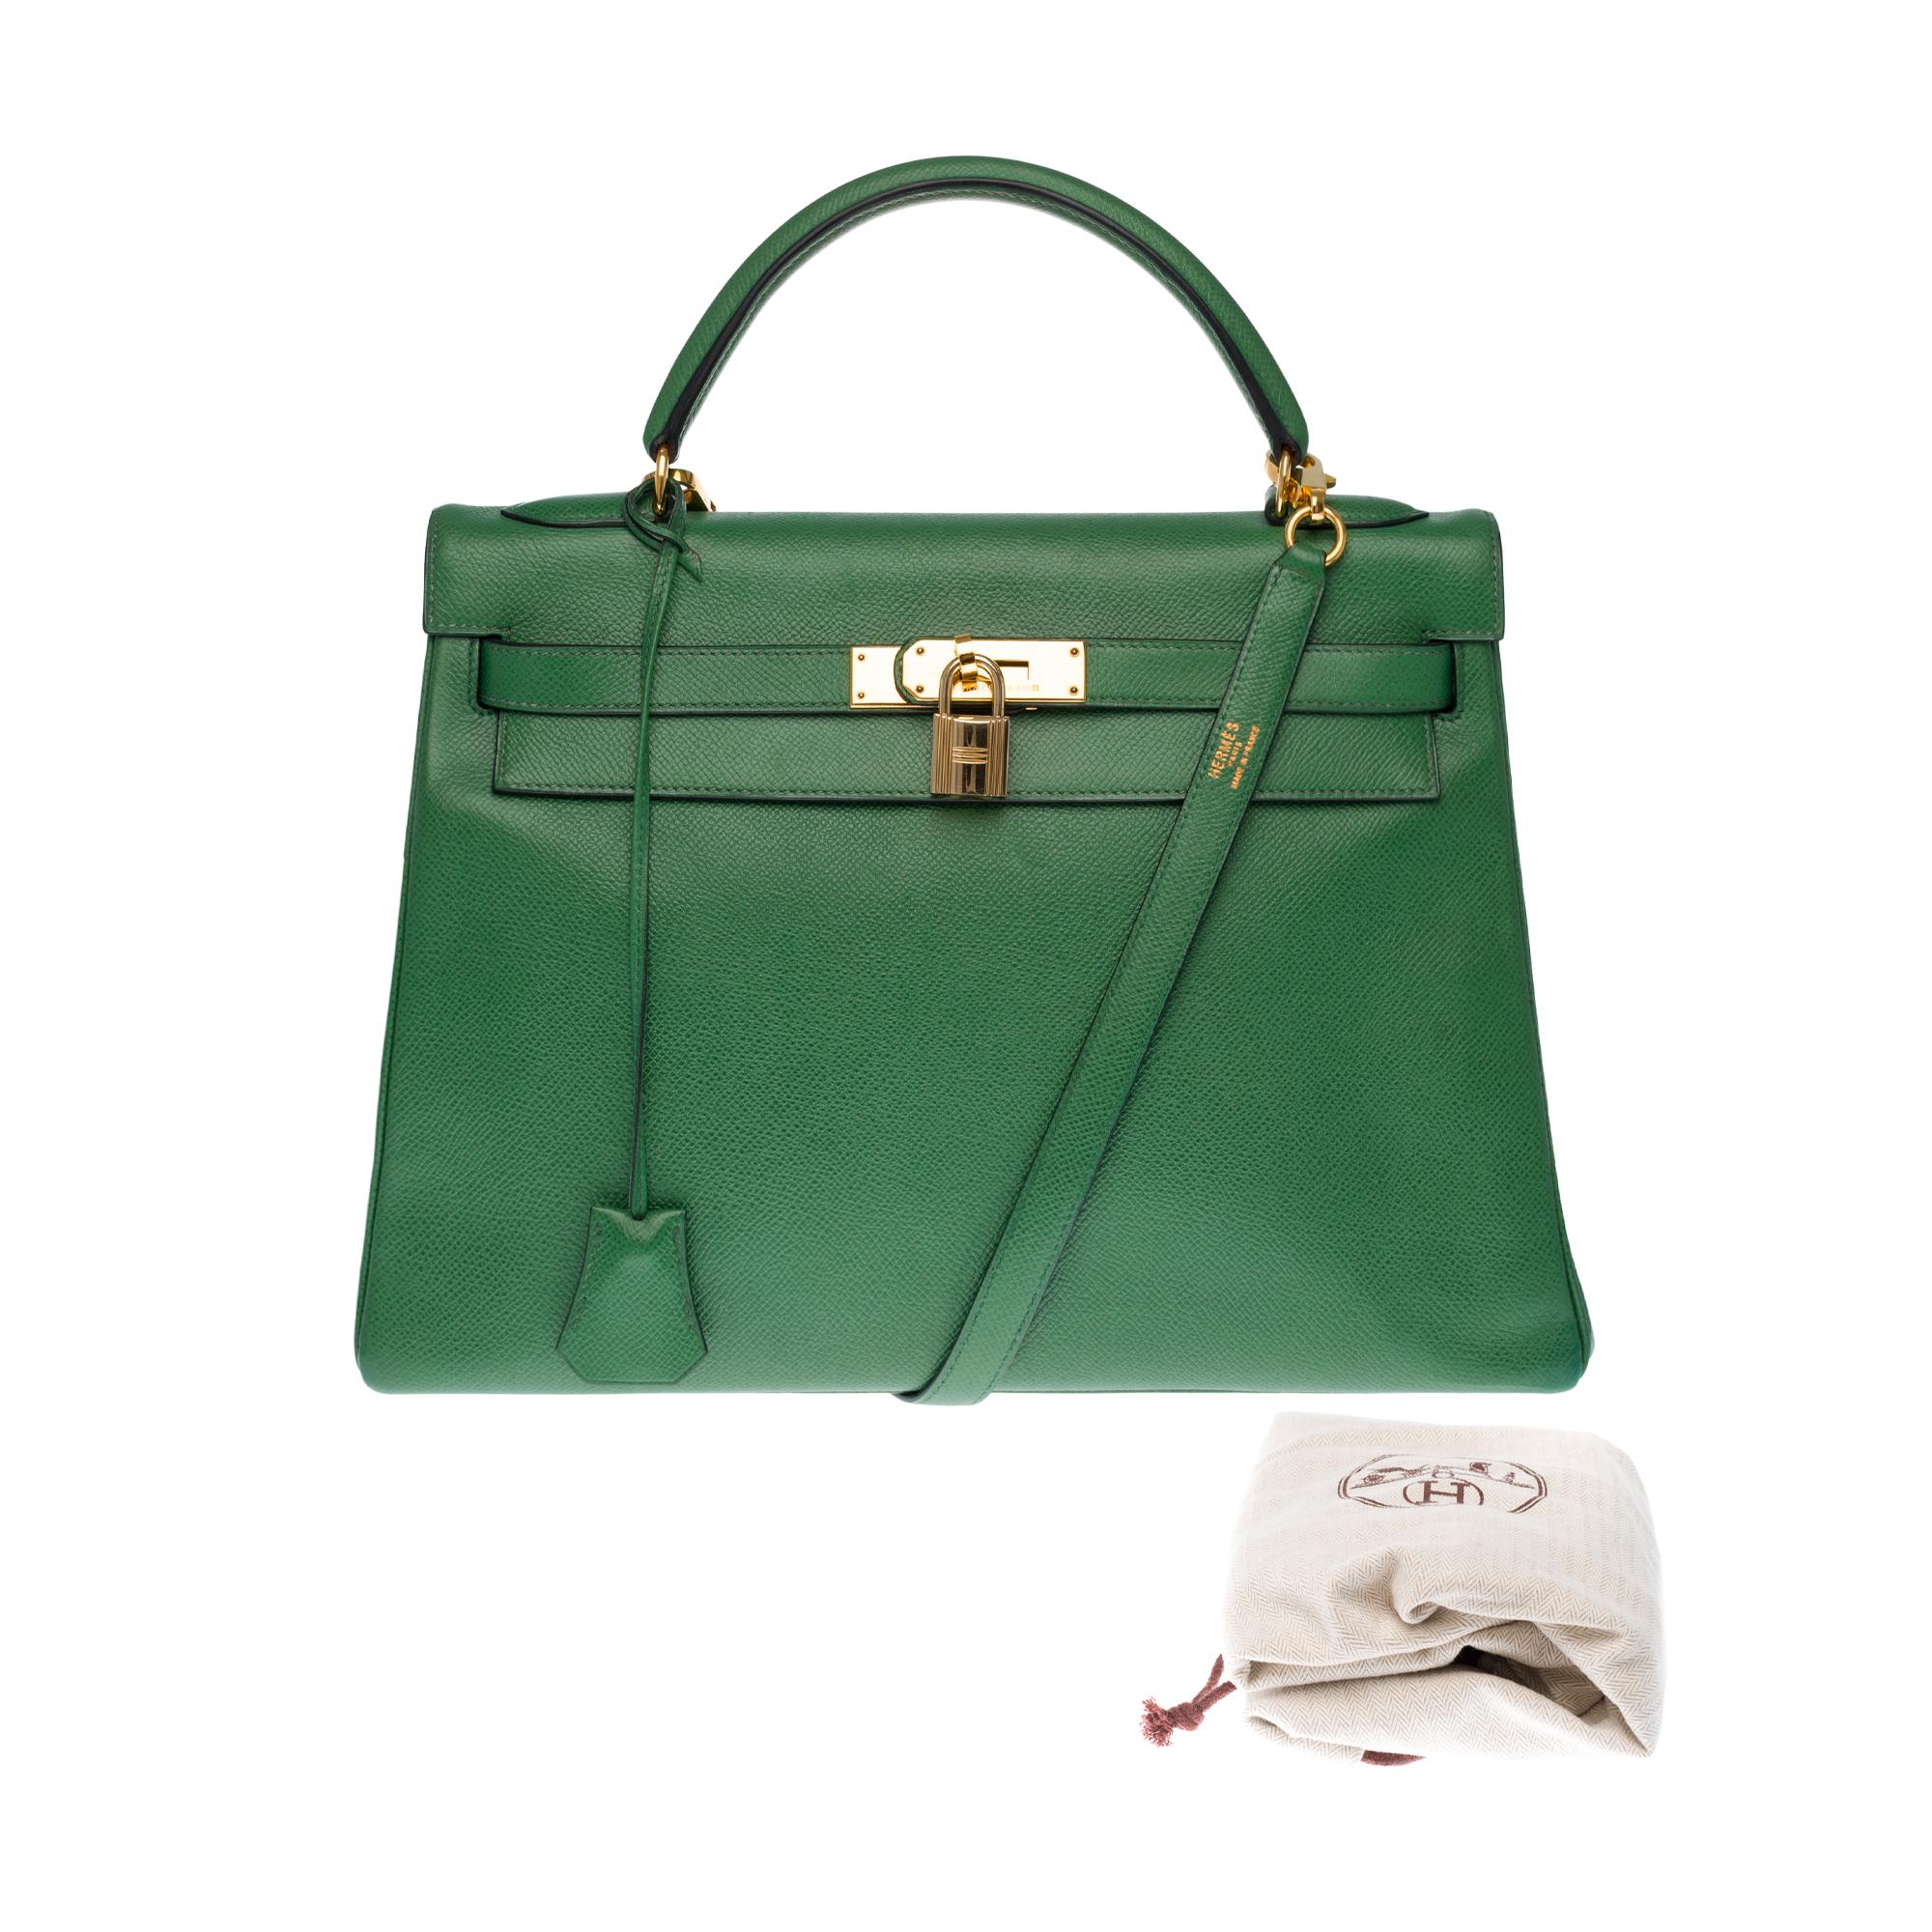 RARE Hermès Kelly 32 handbag with strap in green courchevel and gold hardware 6